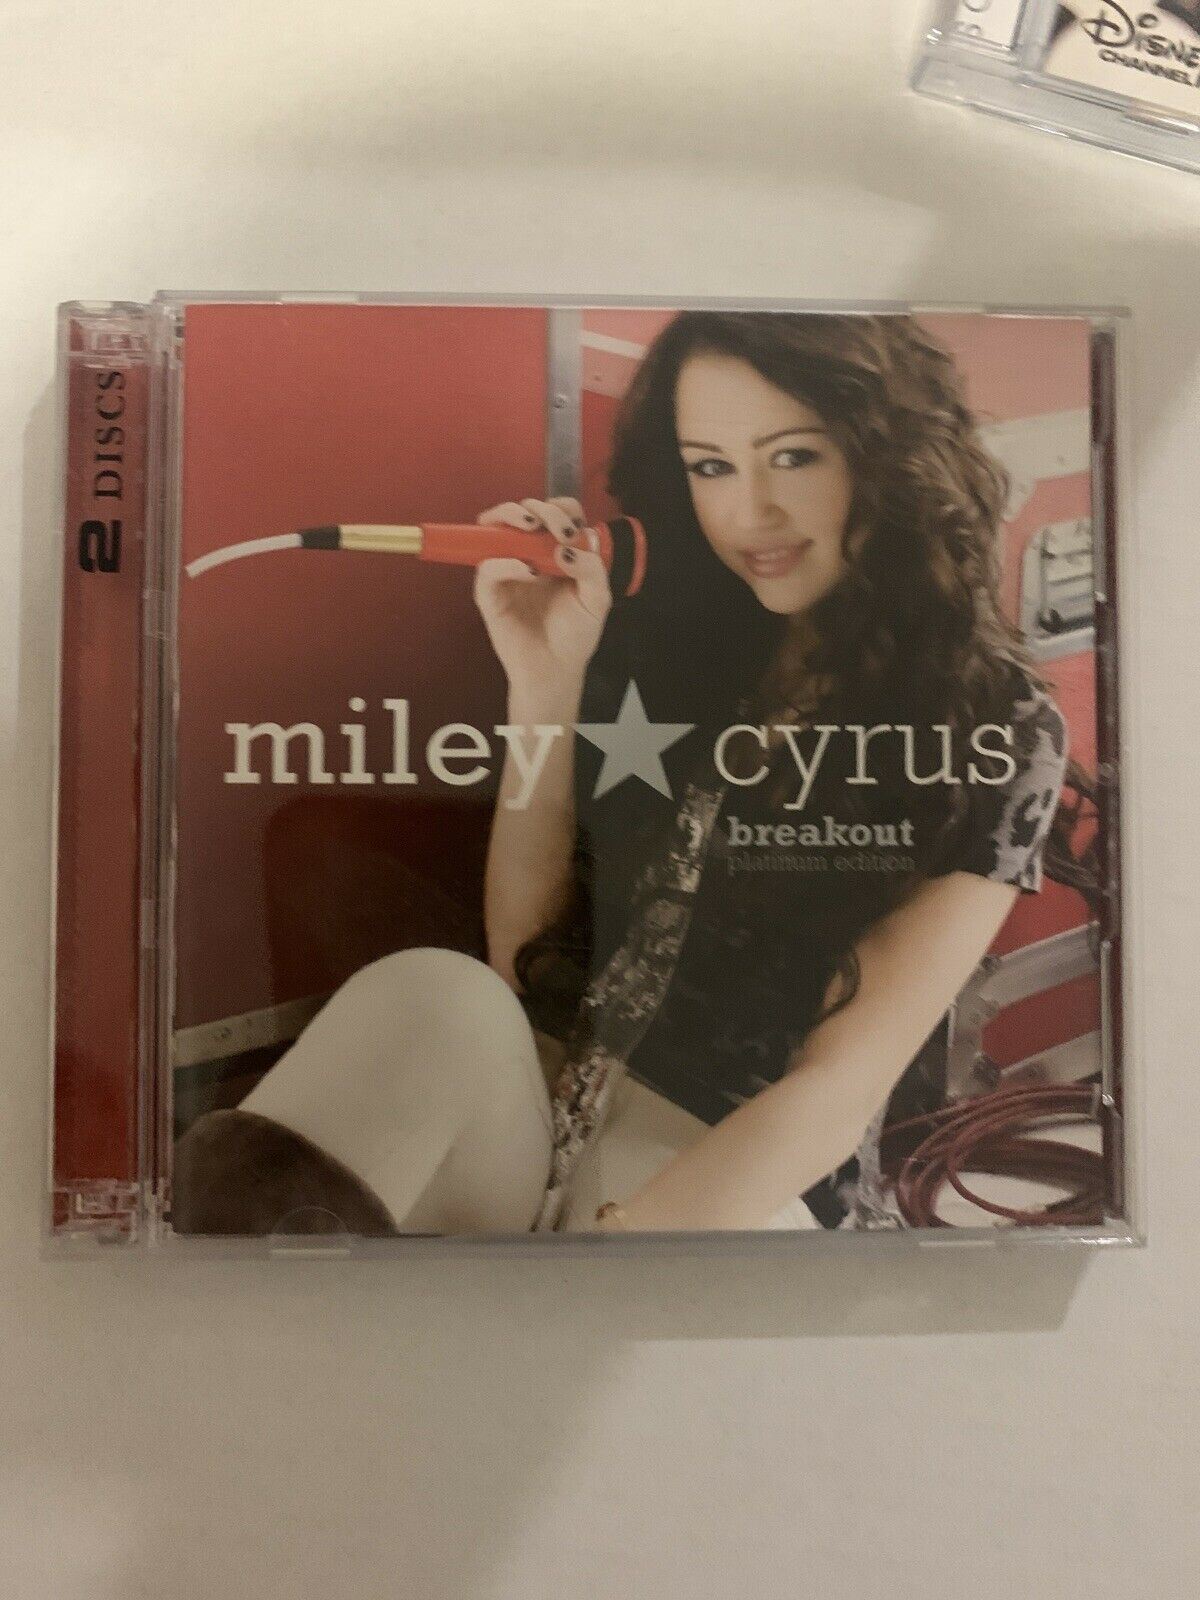 Hannah Montana 3, Miley Cyrus - Breakout Platinum Edition & Can't Be Tamed CD